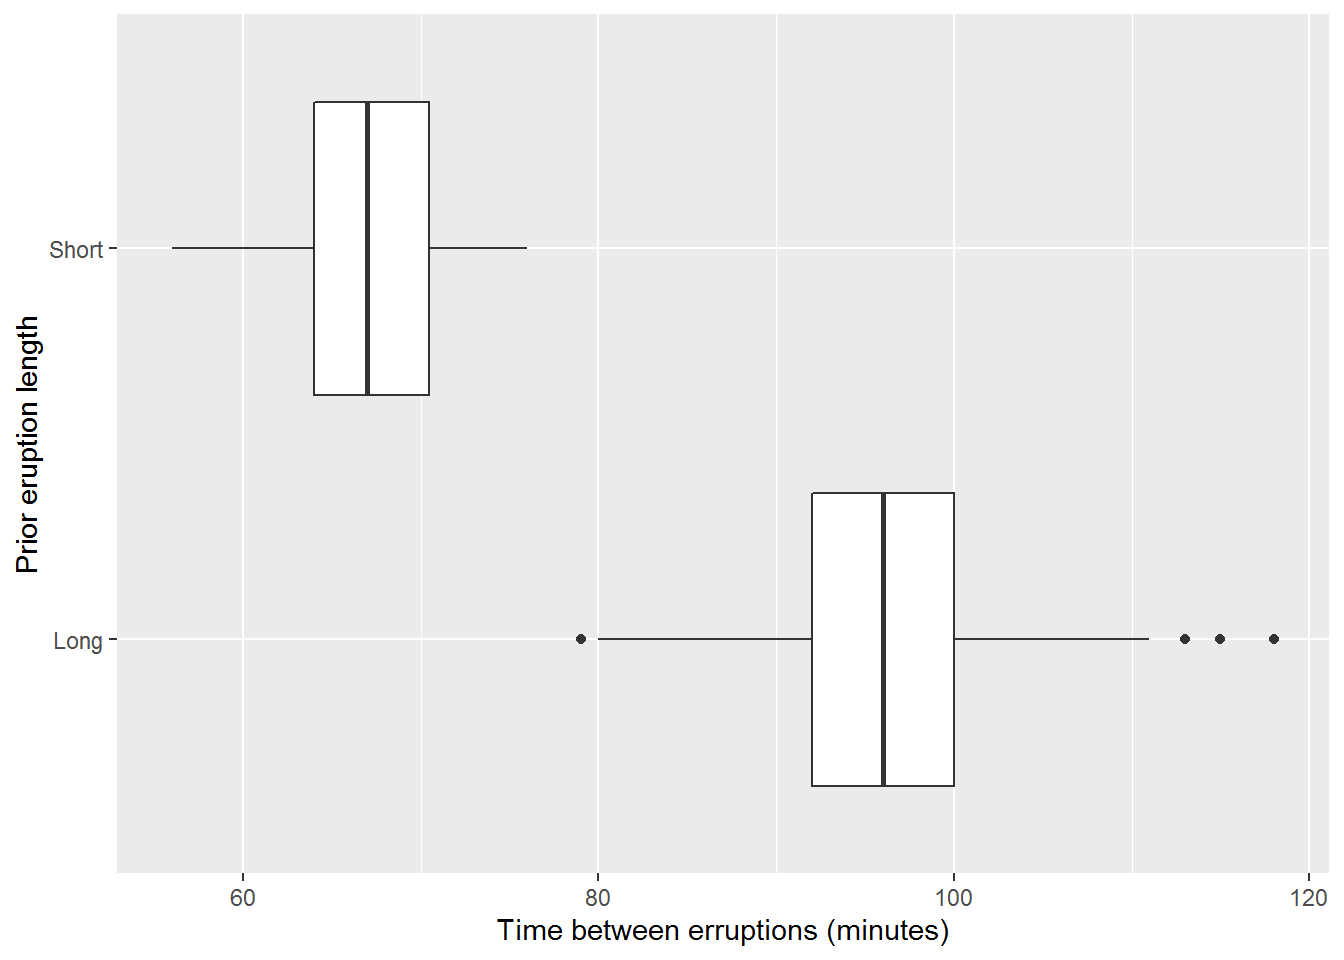 Box Plot of Eruption Times Based on Prior Eruption Using R and ggplots2